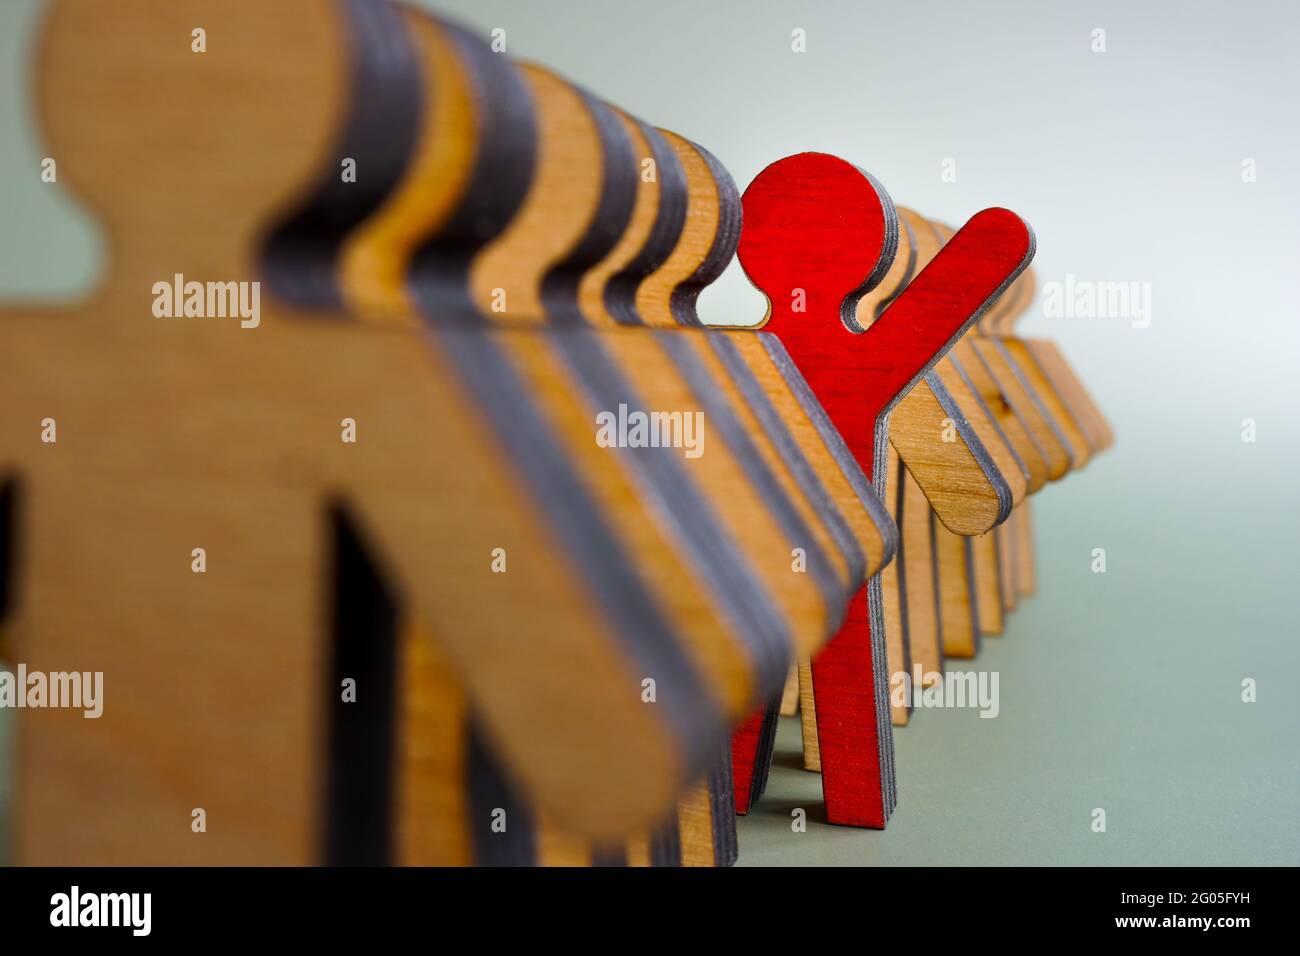 Activist stand out from the crowd concept. The red figurine is in the line of others. Stock Photo